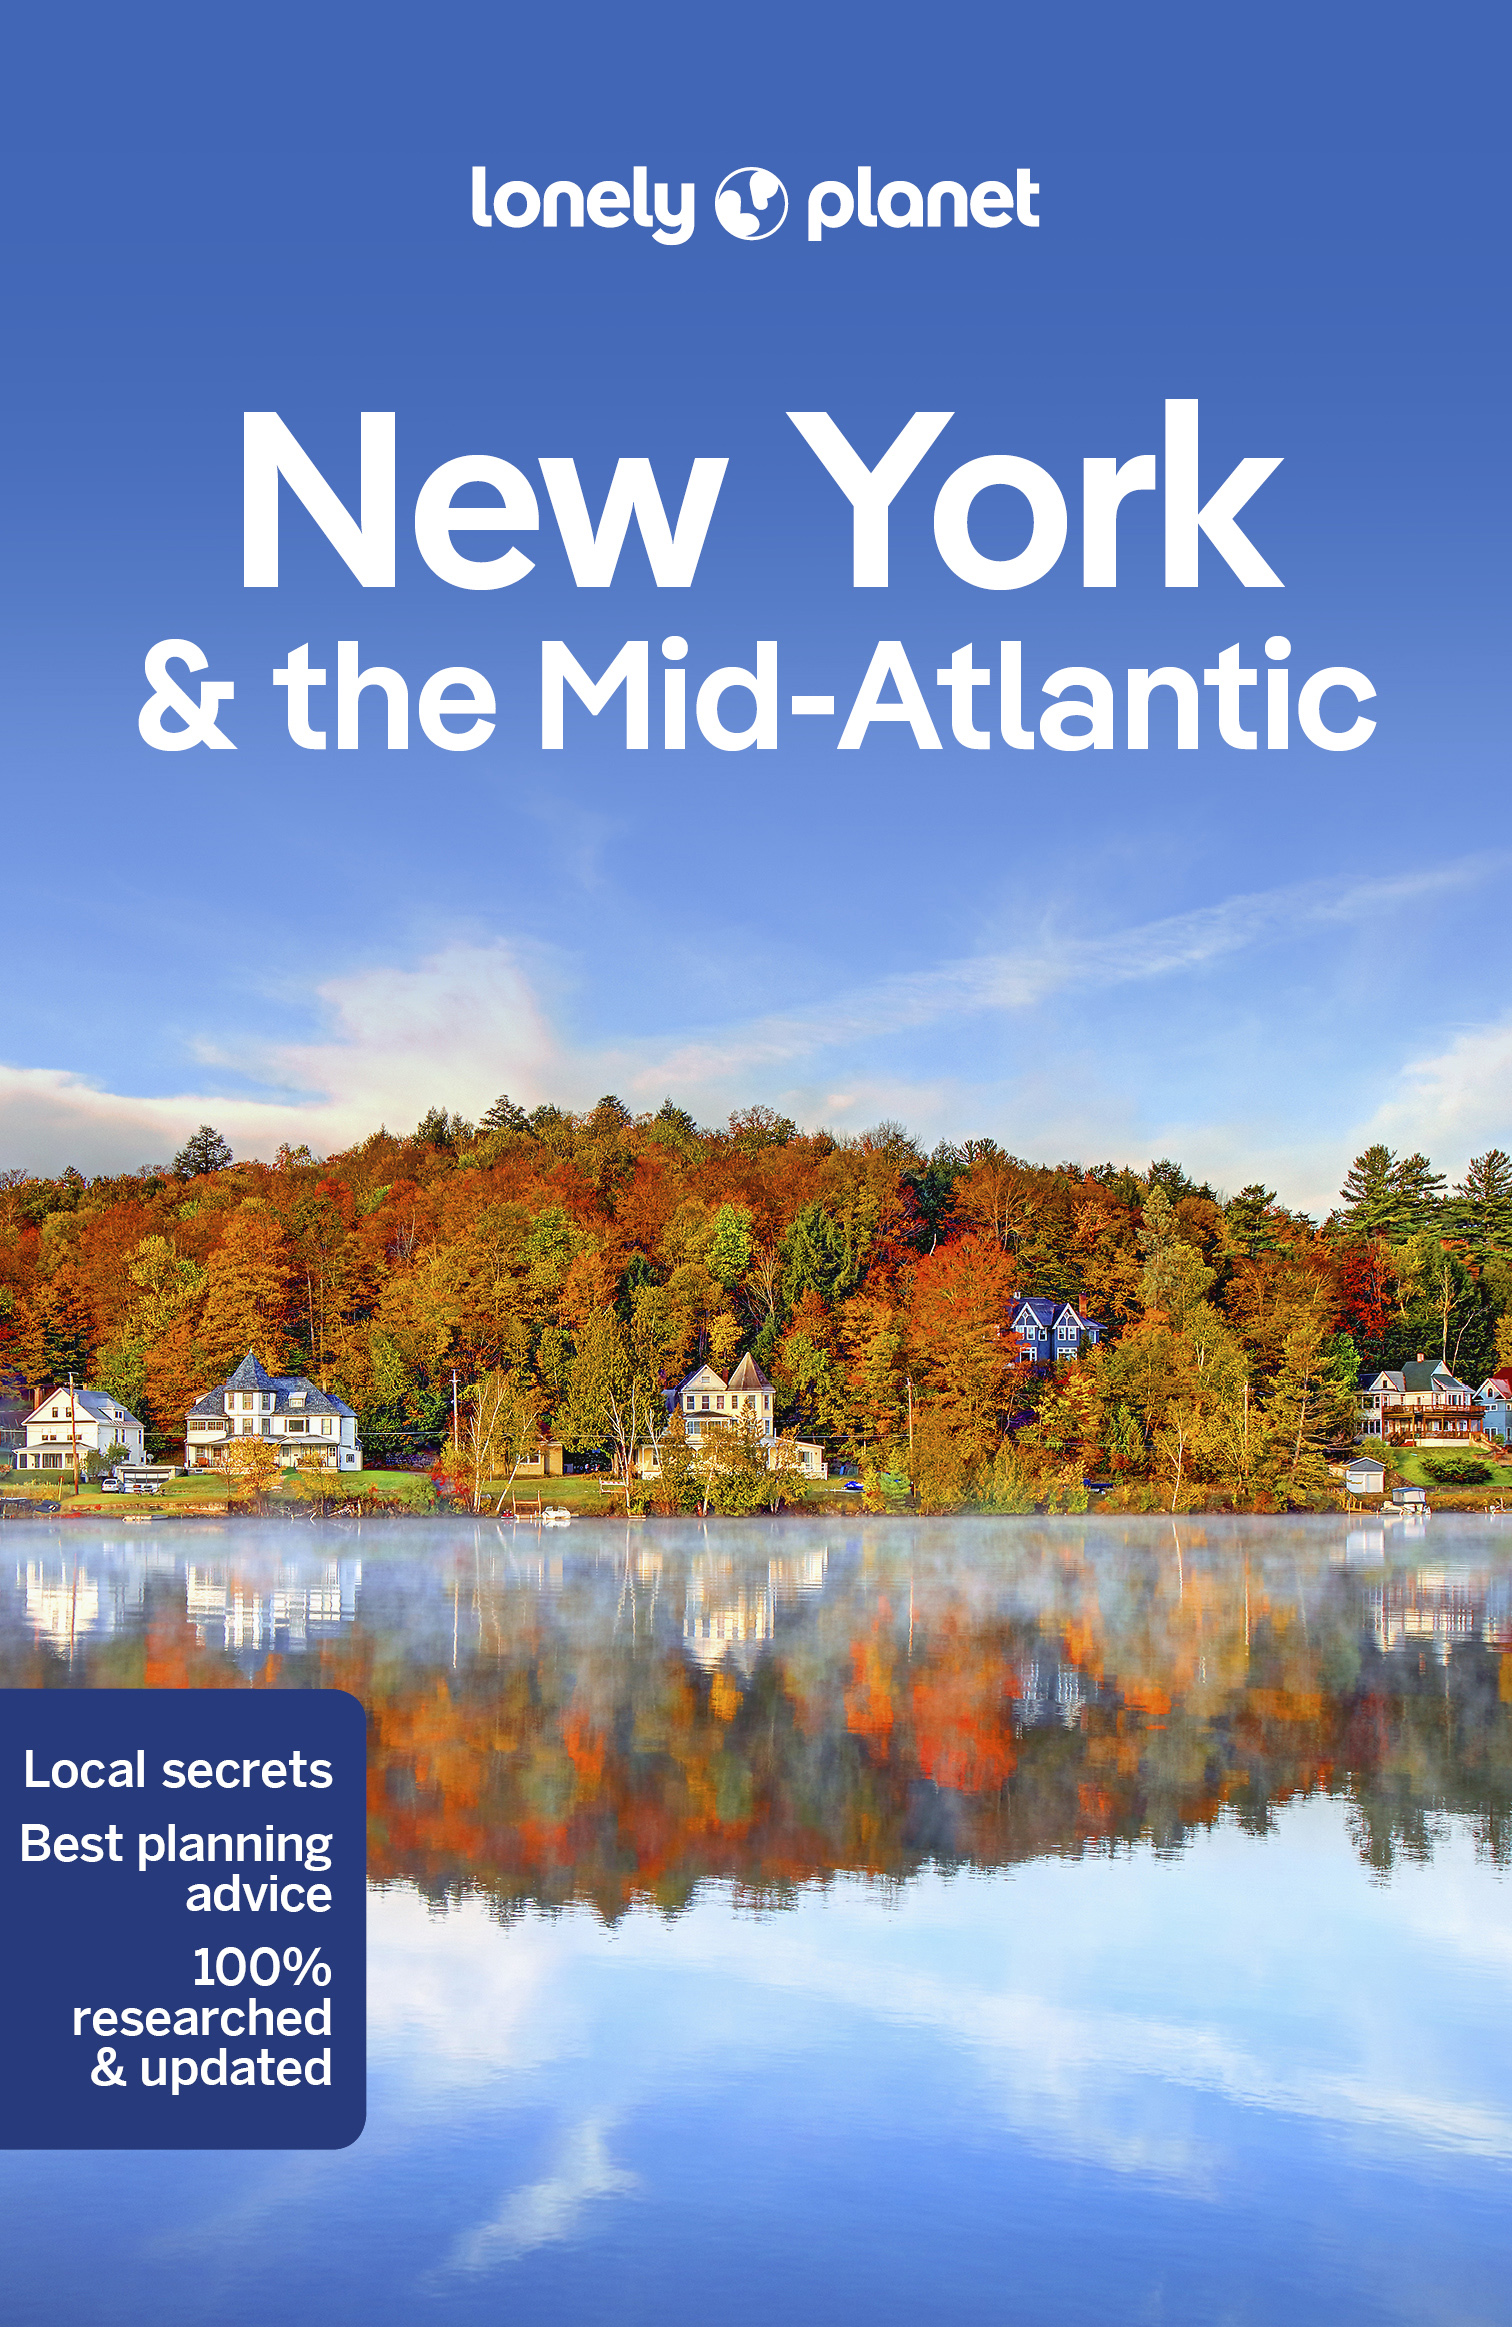 Lonely Planet průvodce New York and the Mid-Atlantic 2.edice anglicky L